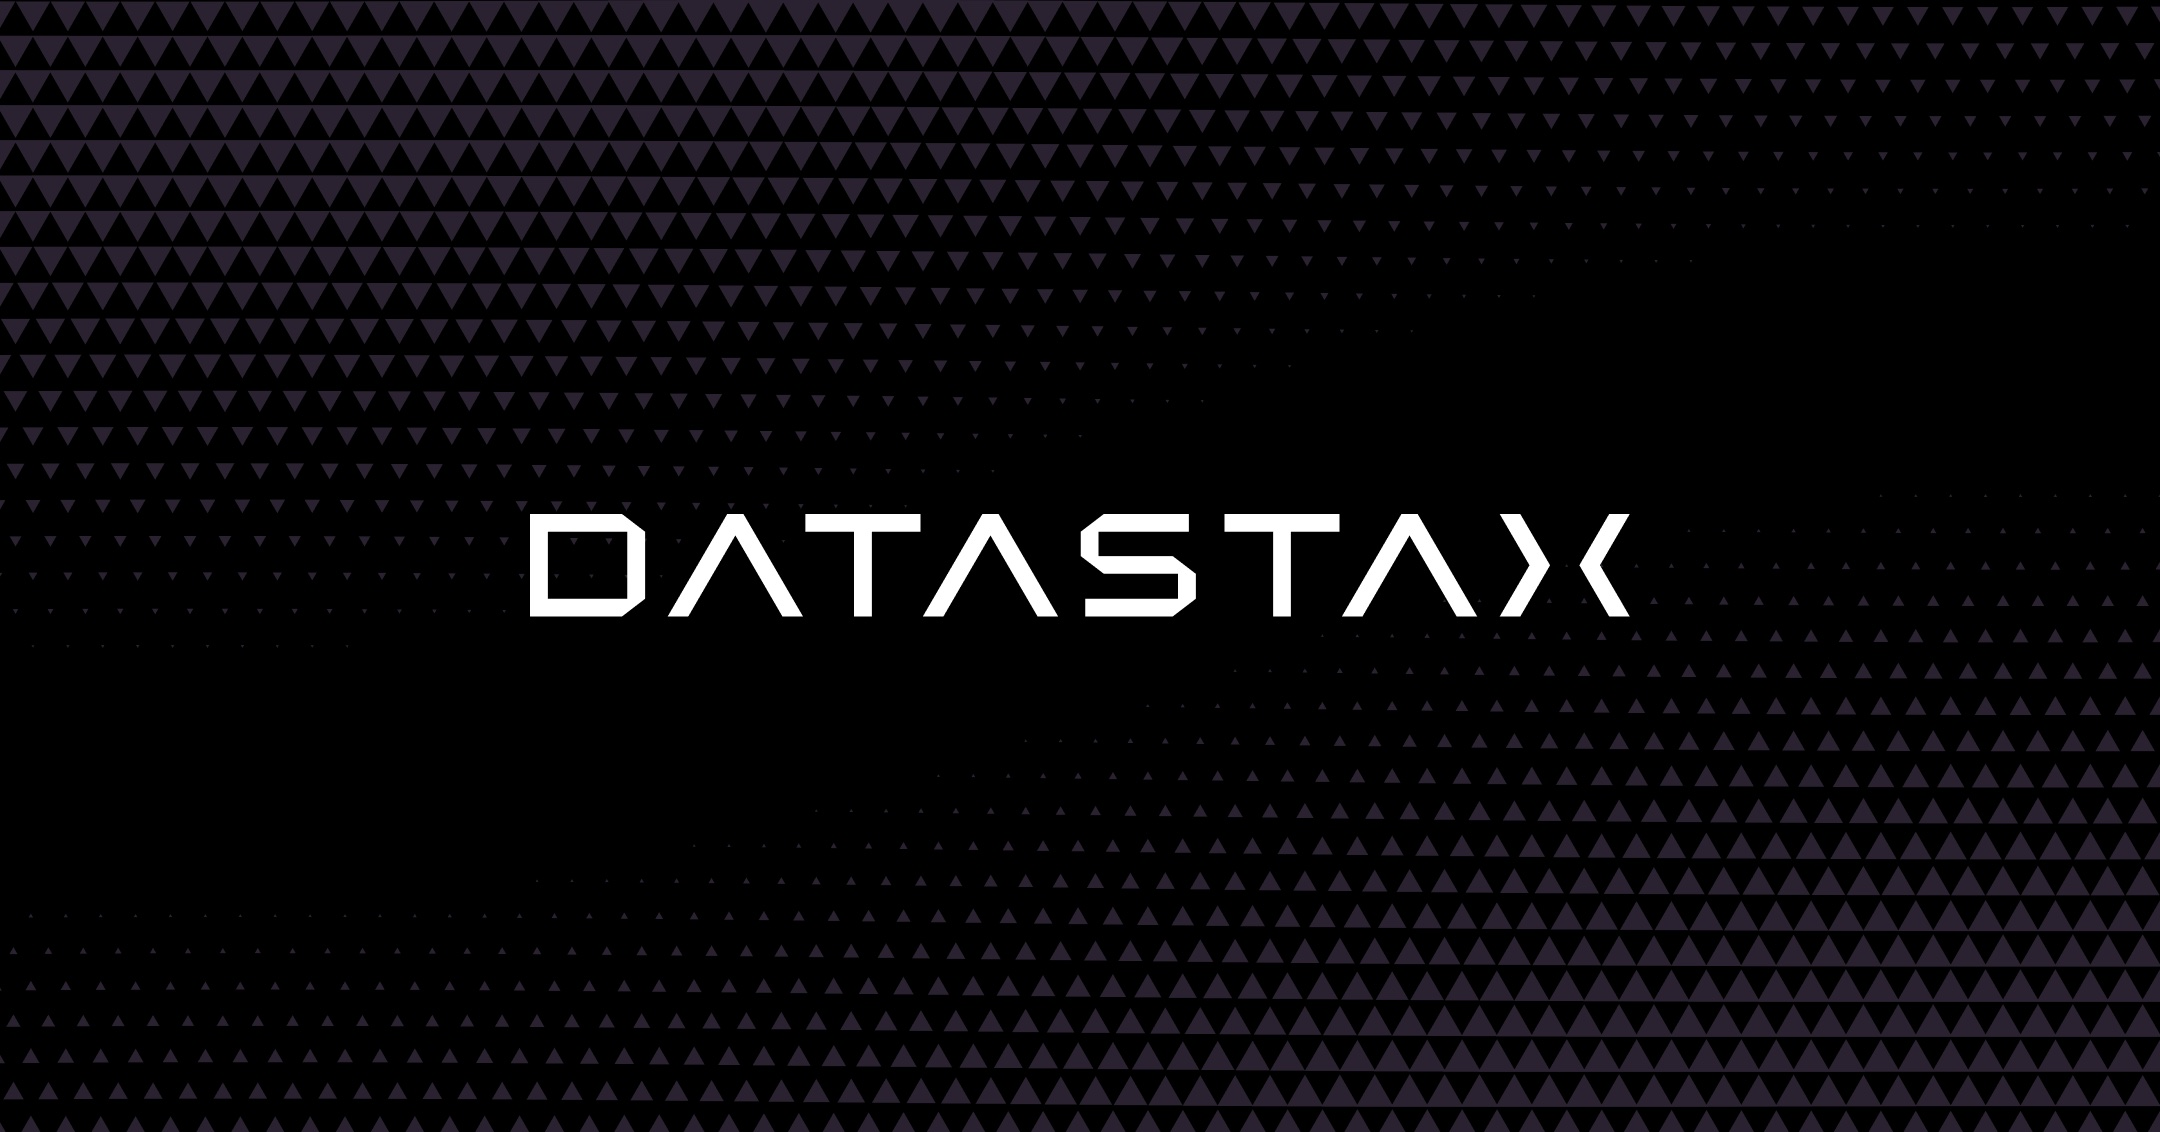 Optimizing Data Management in Containers With Kubernetes and DataStax